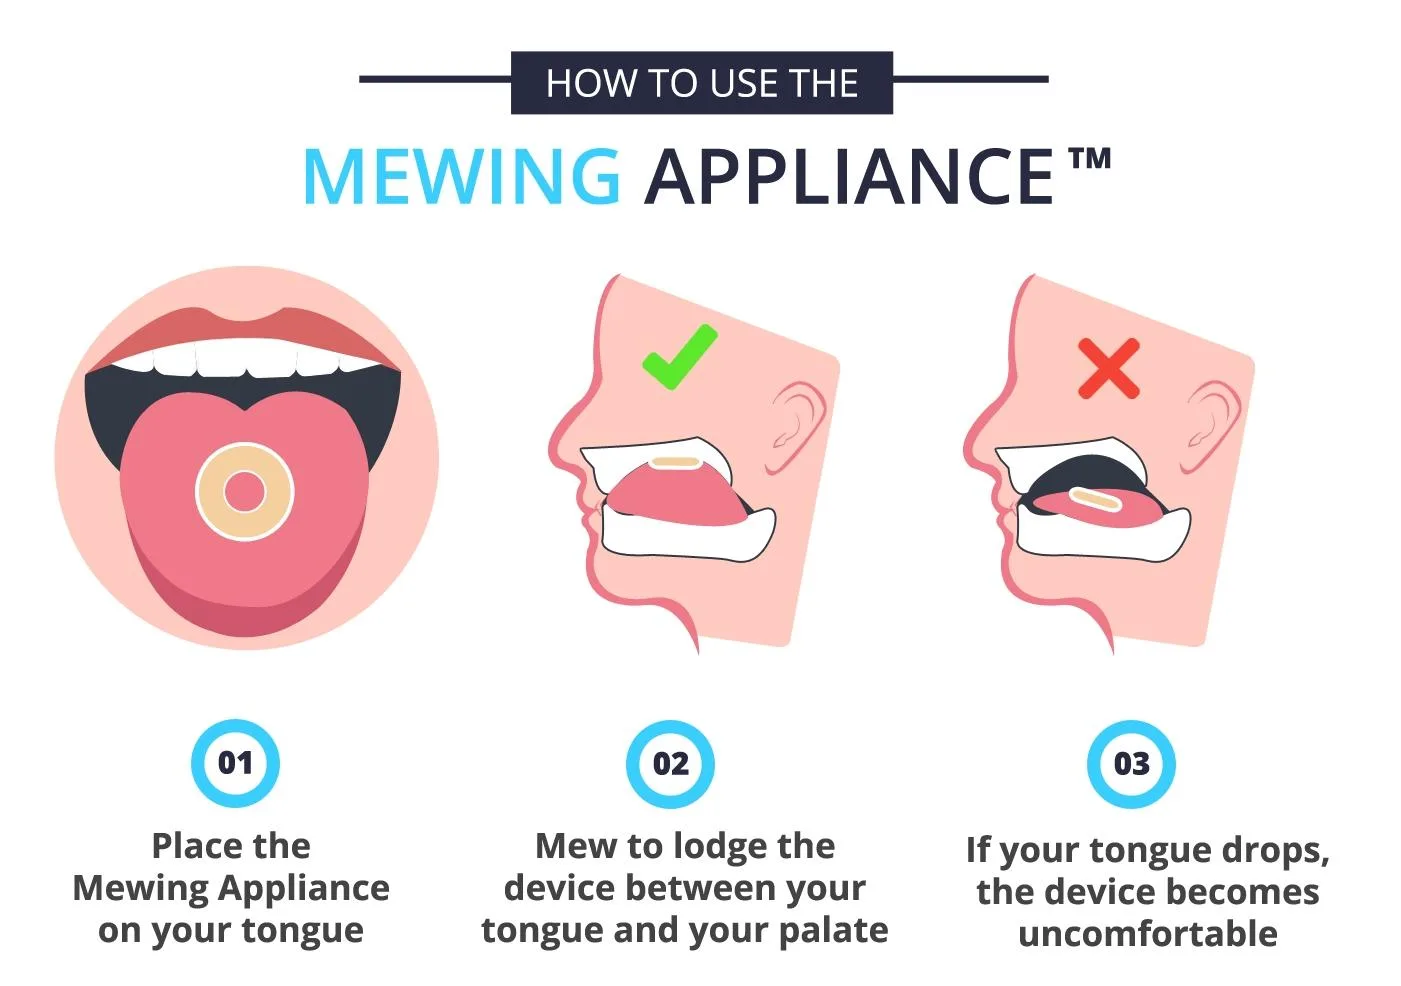 How to use the Mewing Appliance